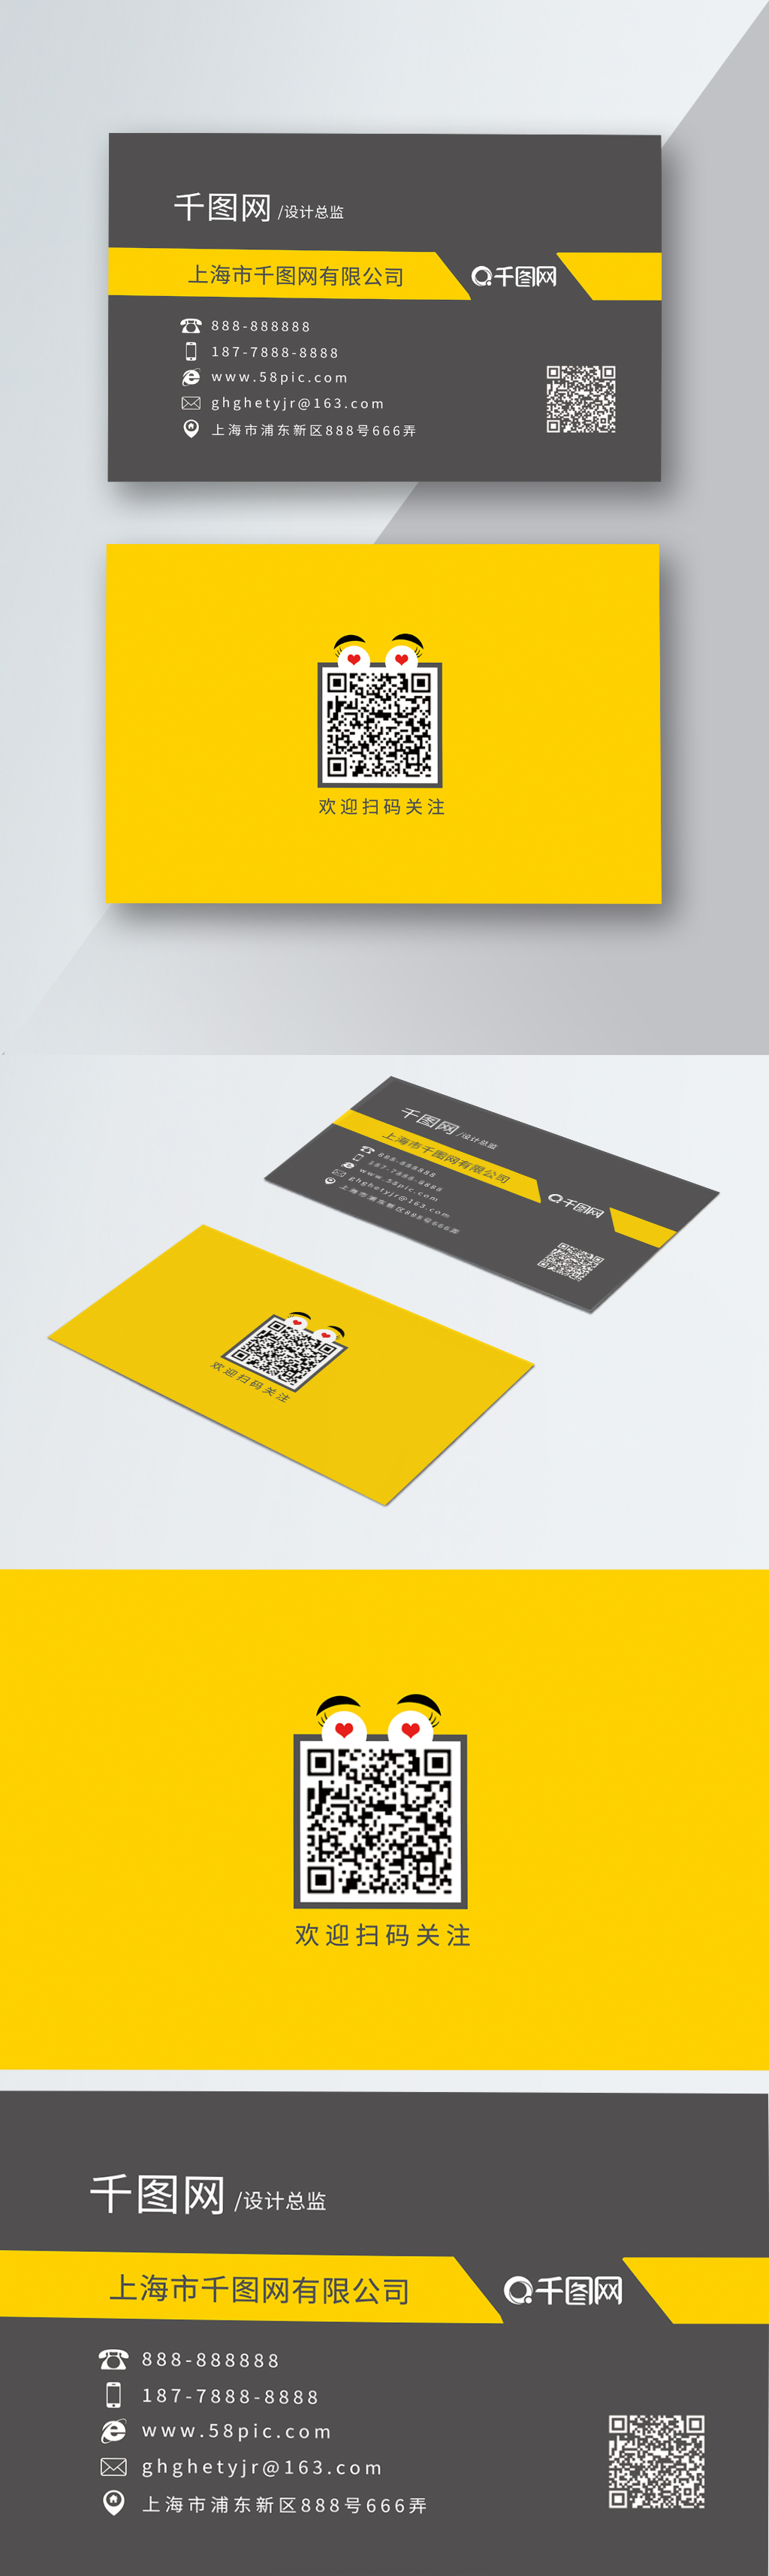 Download Yellow Creative Business Card Design Template Image Picture Free Download 400727796 Lovepik Com Yellowimages Mockups